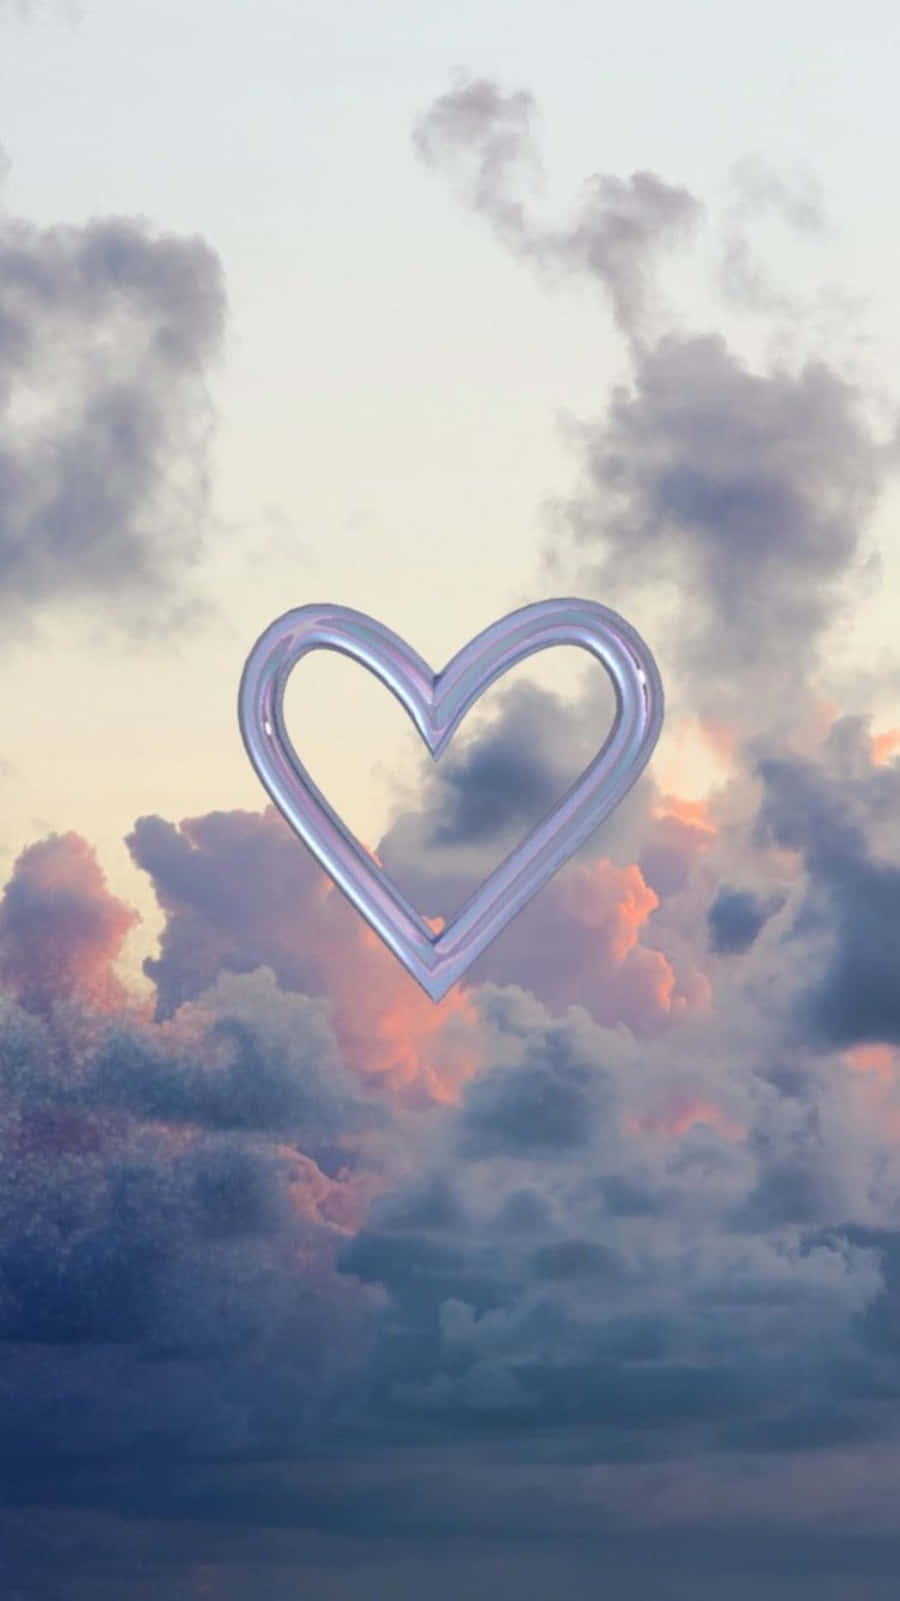 Love in the Air - A vibrant Heart Shape in Full Bloom Wallpaper